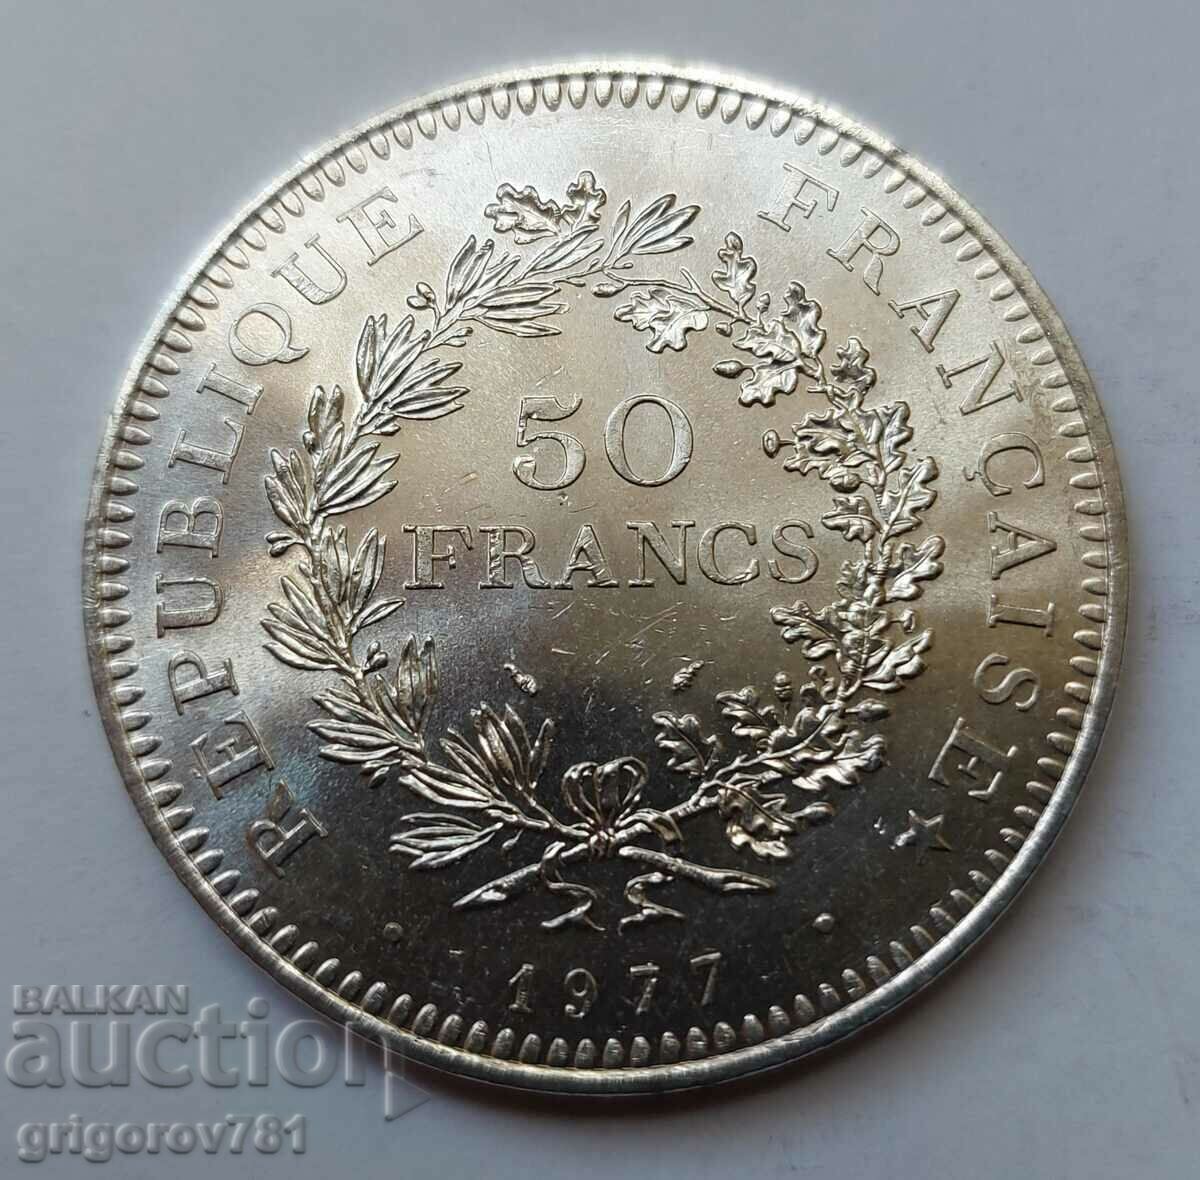 50 Francs Silver France 1977 - Silver Coin #40